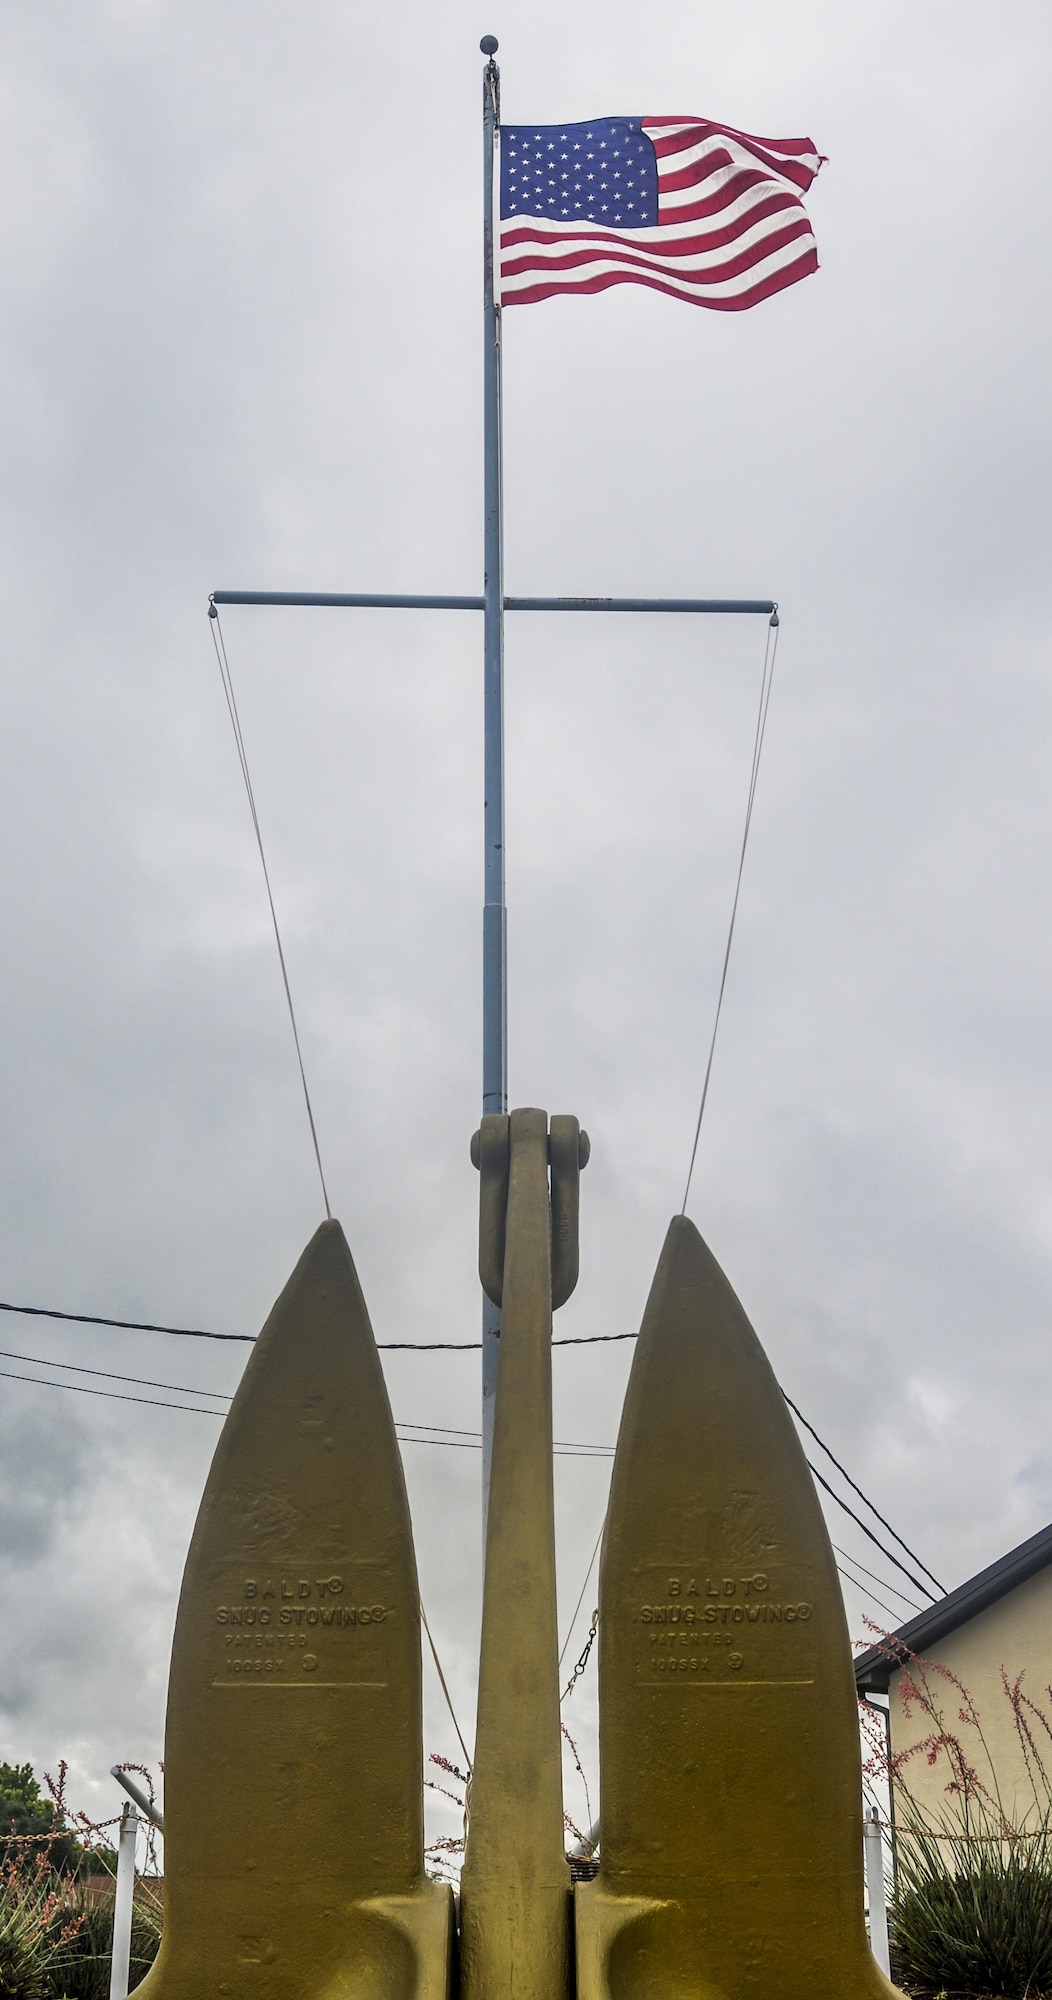 The original brass ship plates of the technical research ship USS Liberty ARTG-5 stand underneath the flag at the Liberty Memorial Park on Goodfellow Air Force Base, Texas, June 3, 2016. The park was dedicated in 2003 then expanded and renovated in 2004. (U.S. Air Force photo by 2nd Lt Tisha Wilkerson/Released)